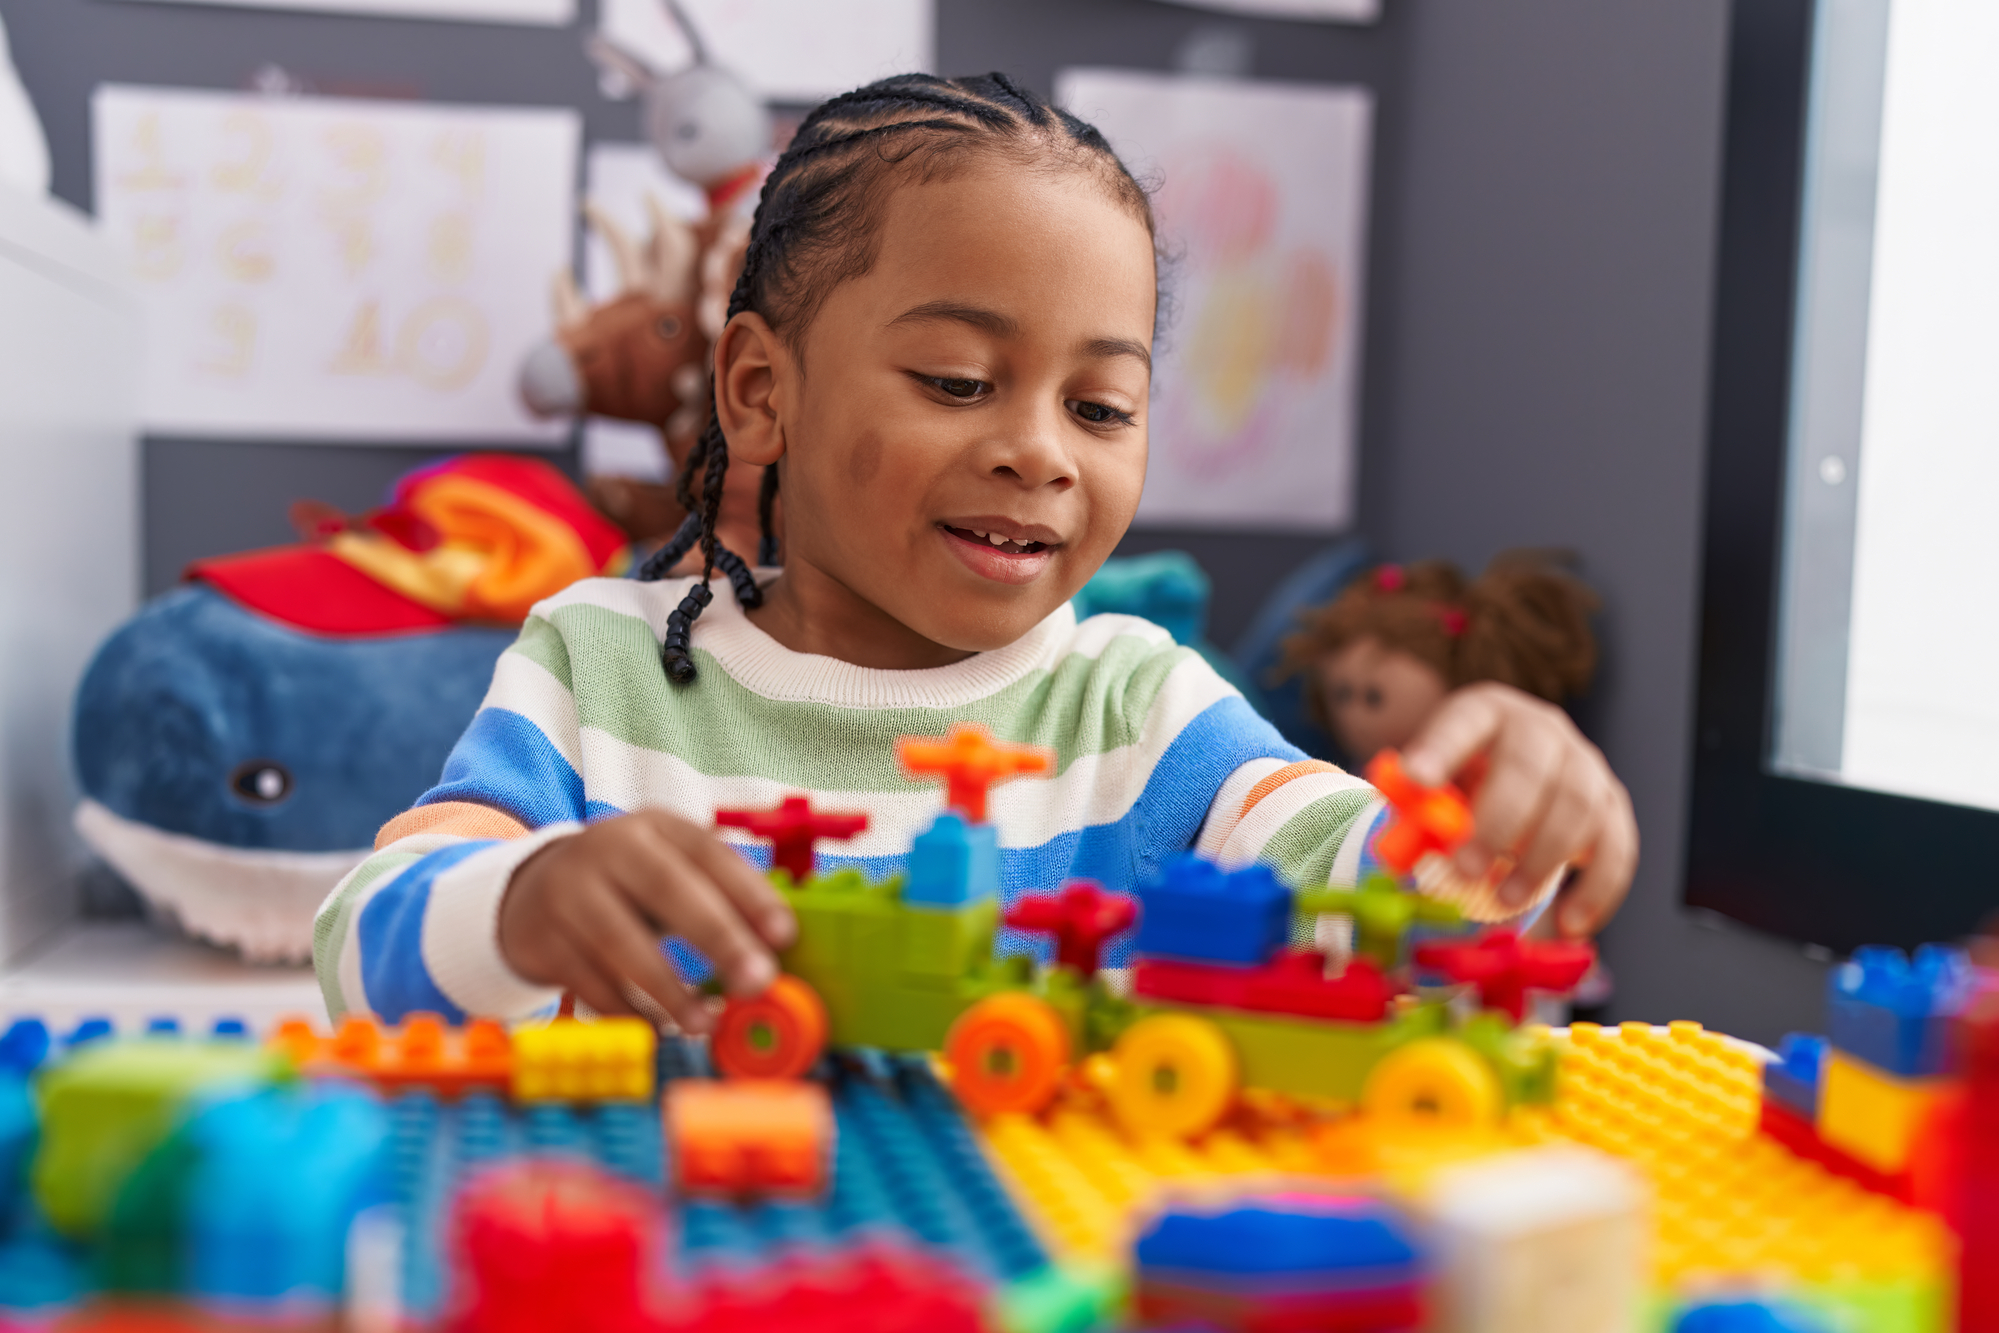 An african american boy with braids is joyfully building with lego bricks at a colorful table. He is wearing a striped sweater and smiling as he assembles his creation, surrounded by toys and a plush whale in the background for an article on lego building tips.